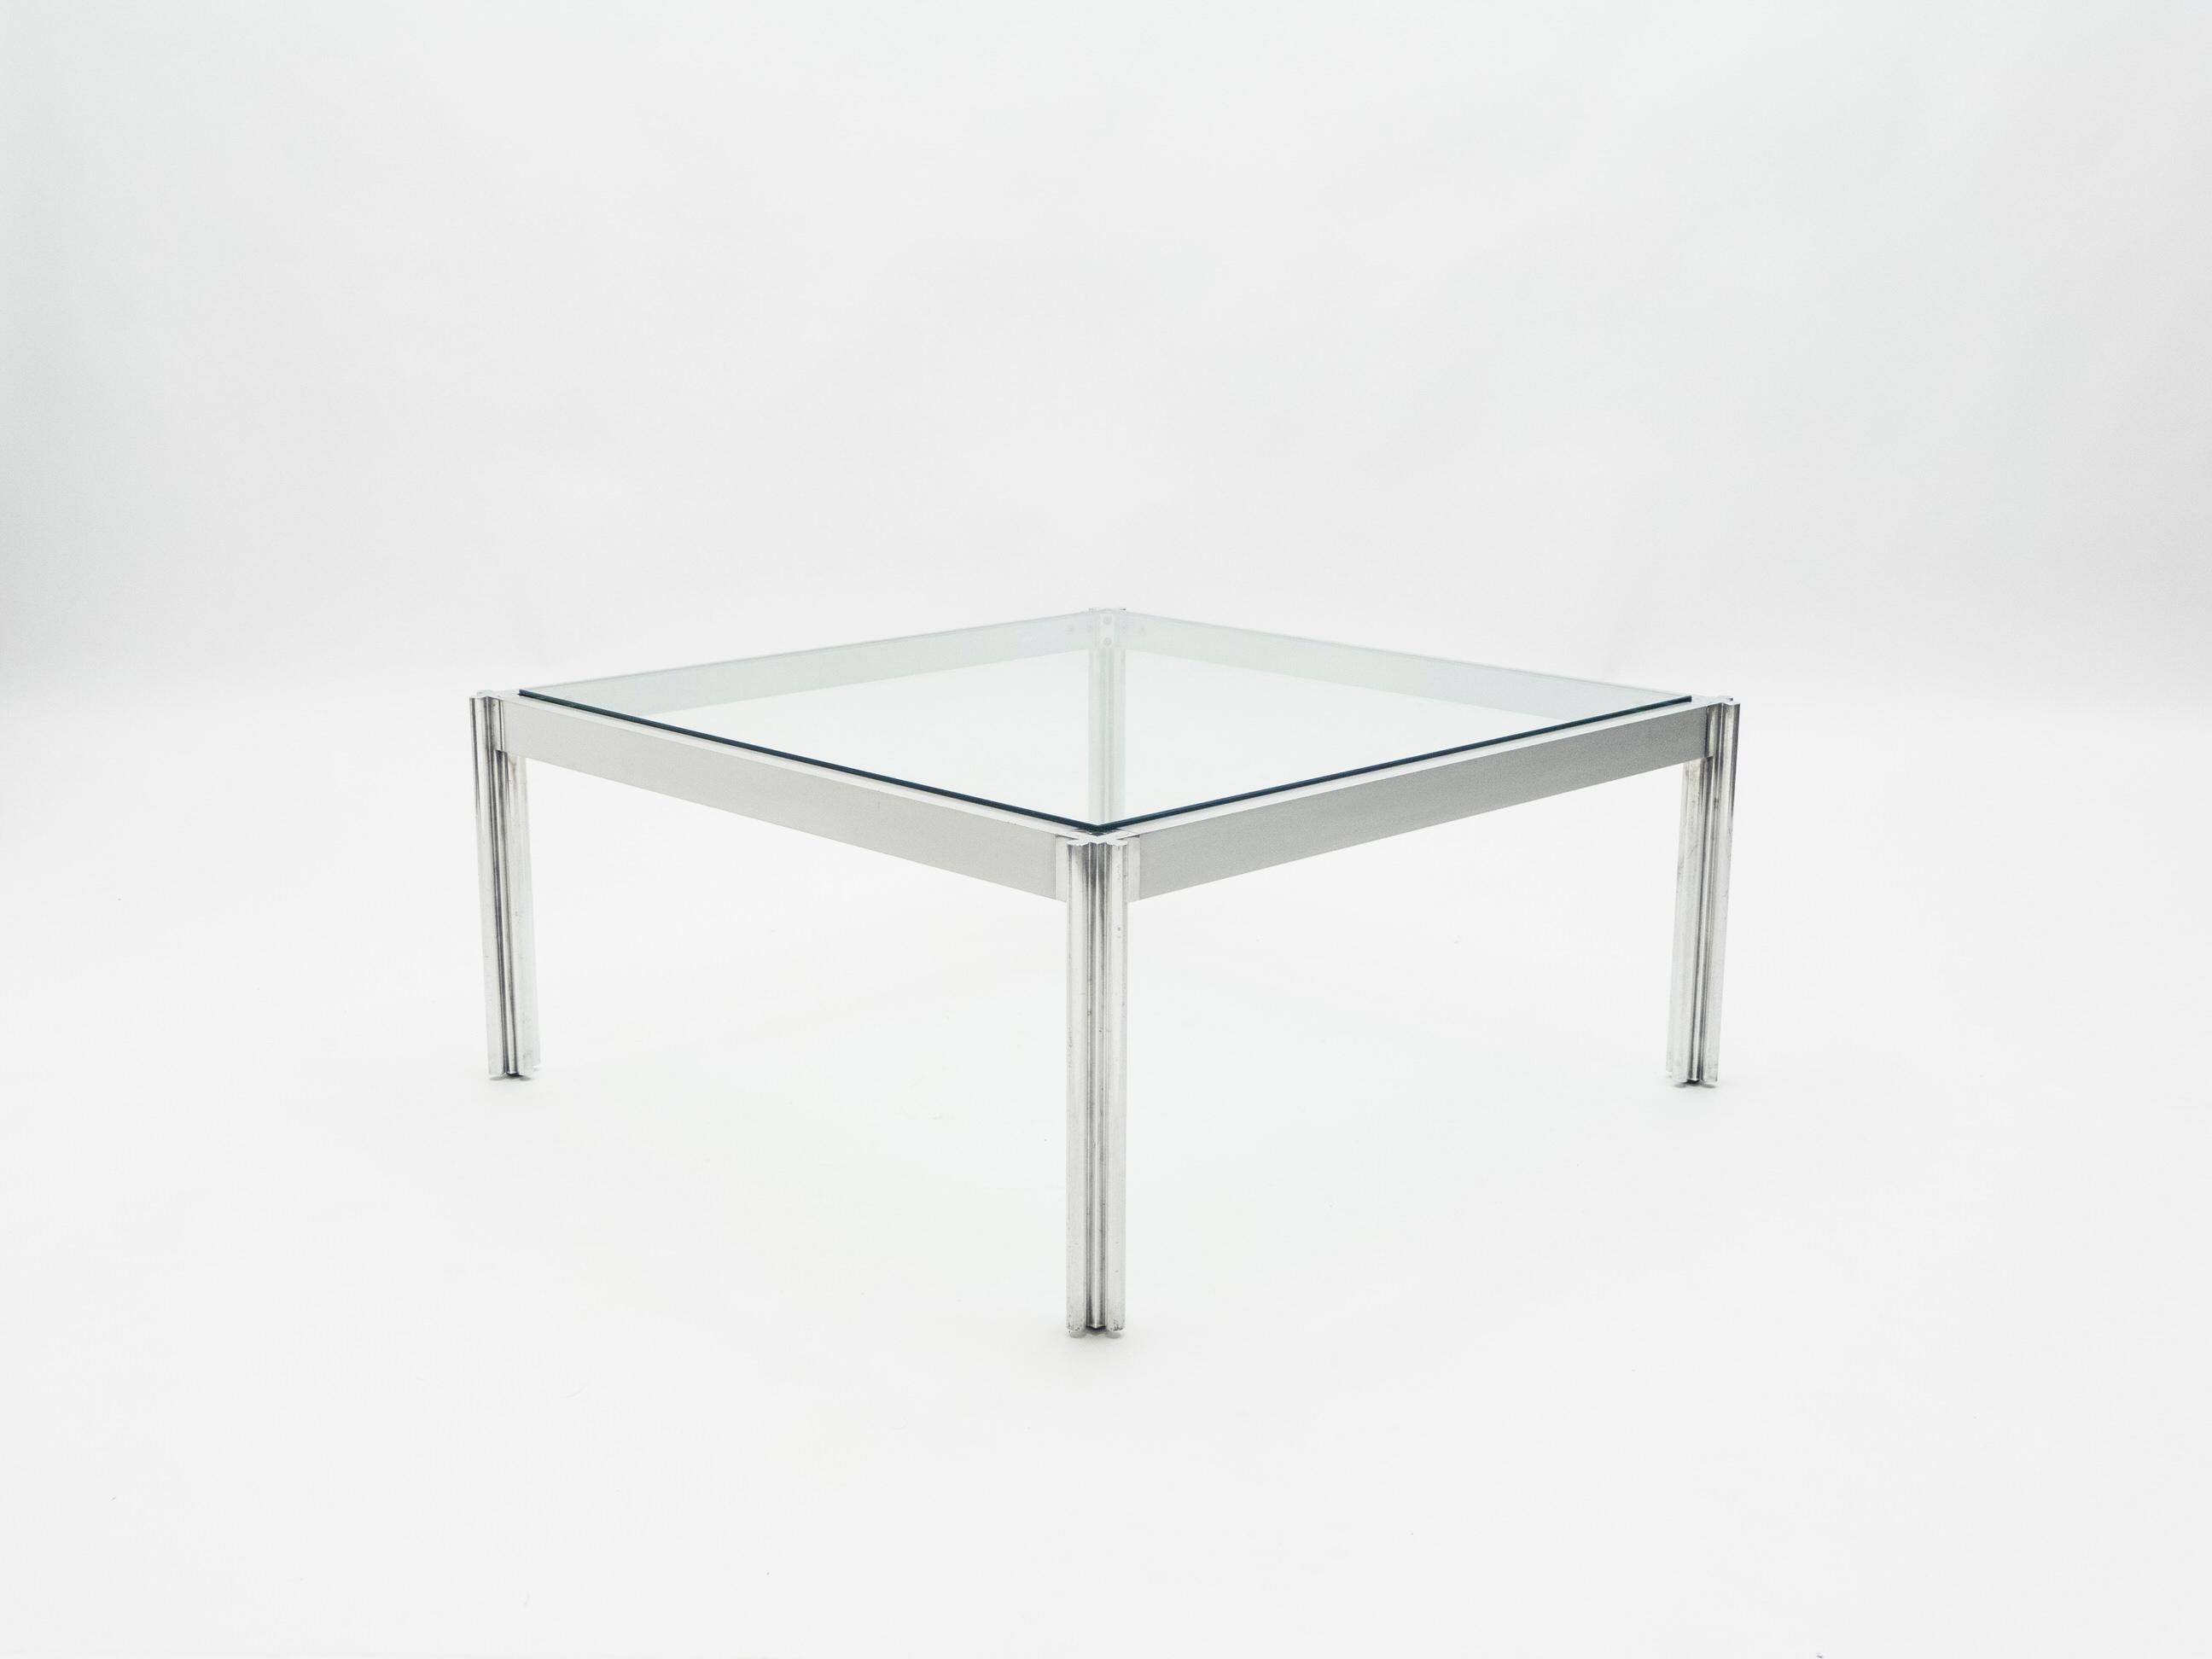 This chrome, aluminum and glass coffee table is a lovely example of clean-lined midcentury design. It was designed by George Ciancimino, the esteemed Algerian-born furniture designer, for French company Mobilier International in 1975. The thick